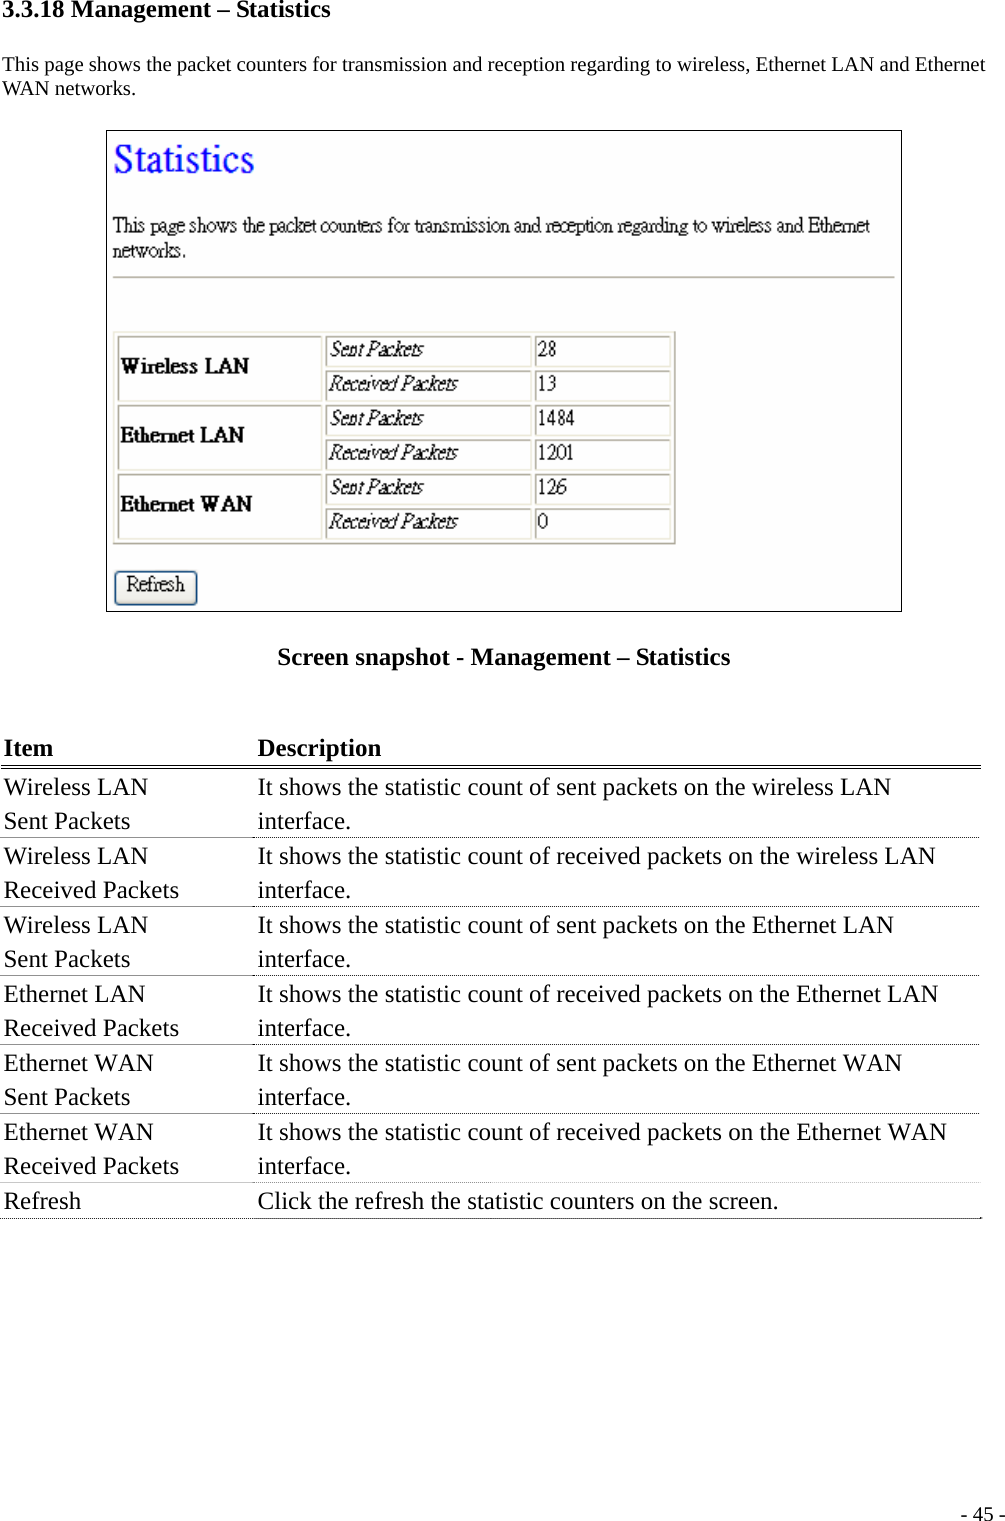 3.3.18 Management – Statistics This page shows the packet counters for transmission and reception regarding to wireless, Ethernet LAN and Ethernet WAN networks.  Screen snapshot - Management – Statistics  Item Description Wireless LAN Sent Packets It shows the statistic count of sent packets on the wireless LAN interface. Wireless LAN Received Packets It shows the statistic count of received packets on the wireless LAN interface. Wireless LAN Sent Packets   It shows the statistic count of sent packets on the Ethernet LAN interface. Ethernet LAN Received Packets It shows the statistic count of received packets on the Ethernet LAN interface. Ethernet WAN Sent Packets It shows the statistic count of sent packets on the Ethernet WAN interface. Ethernet WAN Received Packets It shows the statistic count of received packets on the Ethernet WAN interface. Refresh   Click the refresh the statistic counters on the screen.   - 45 -